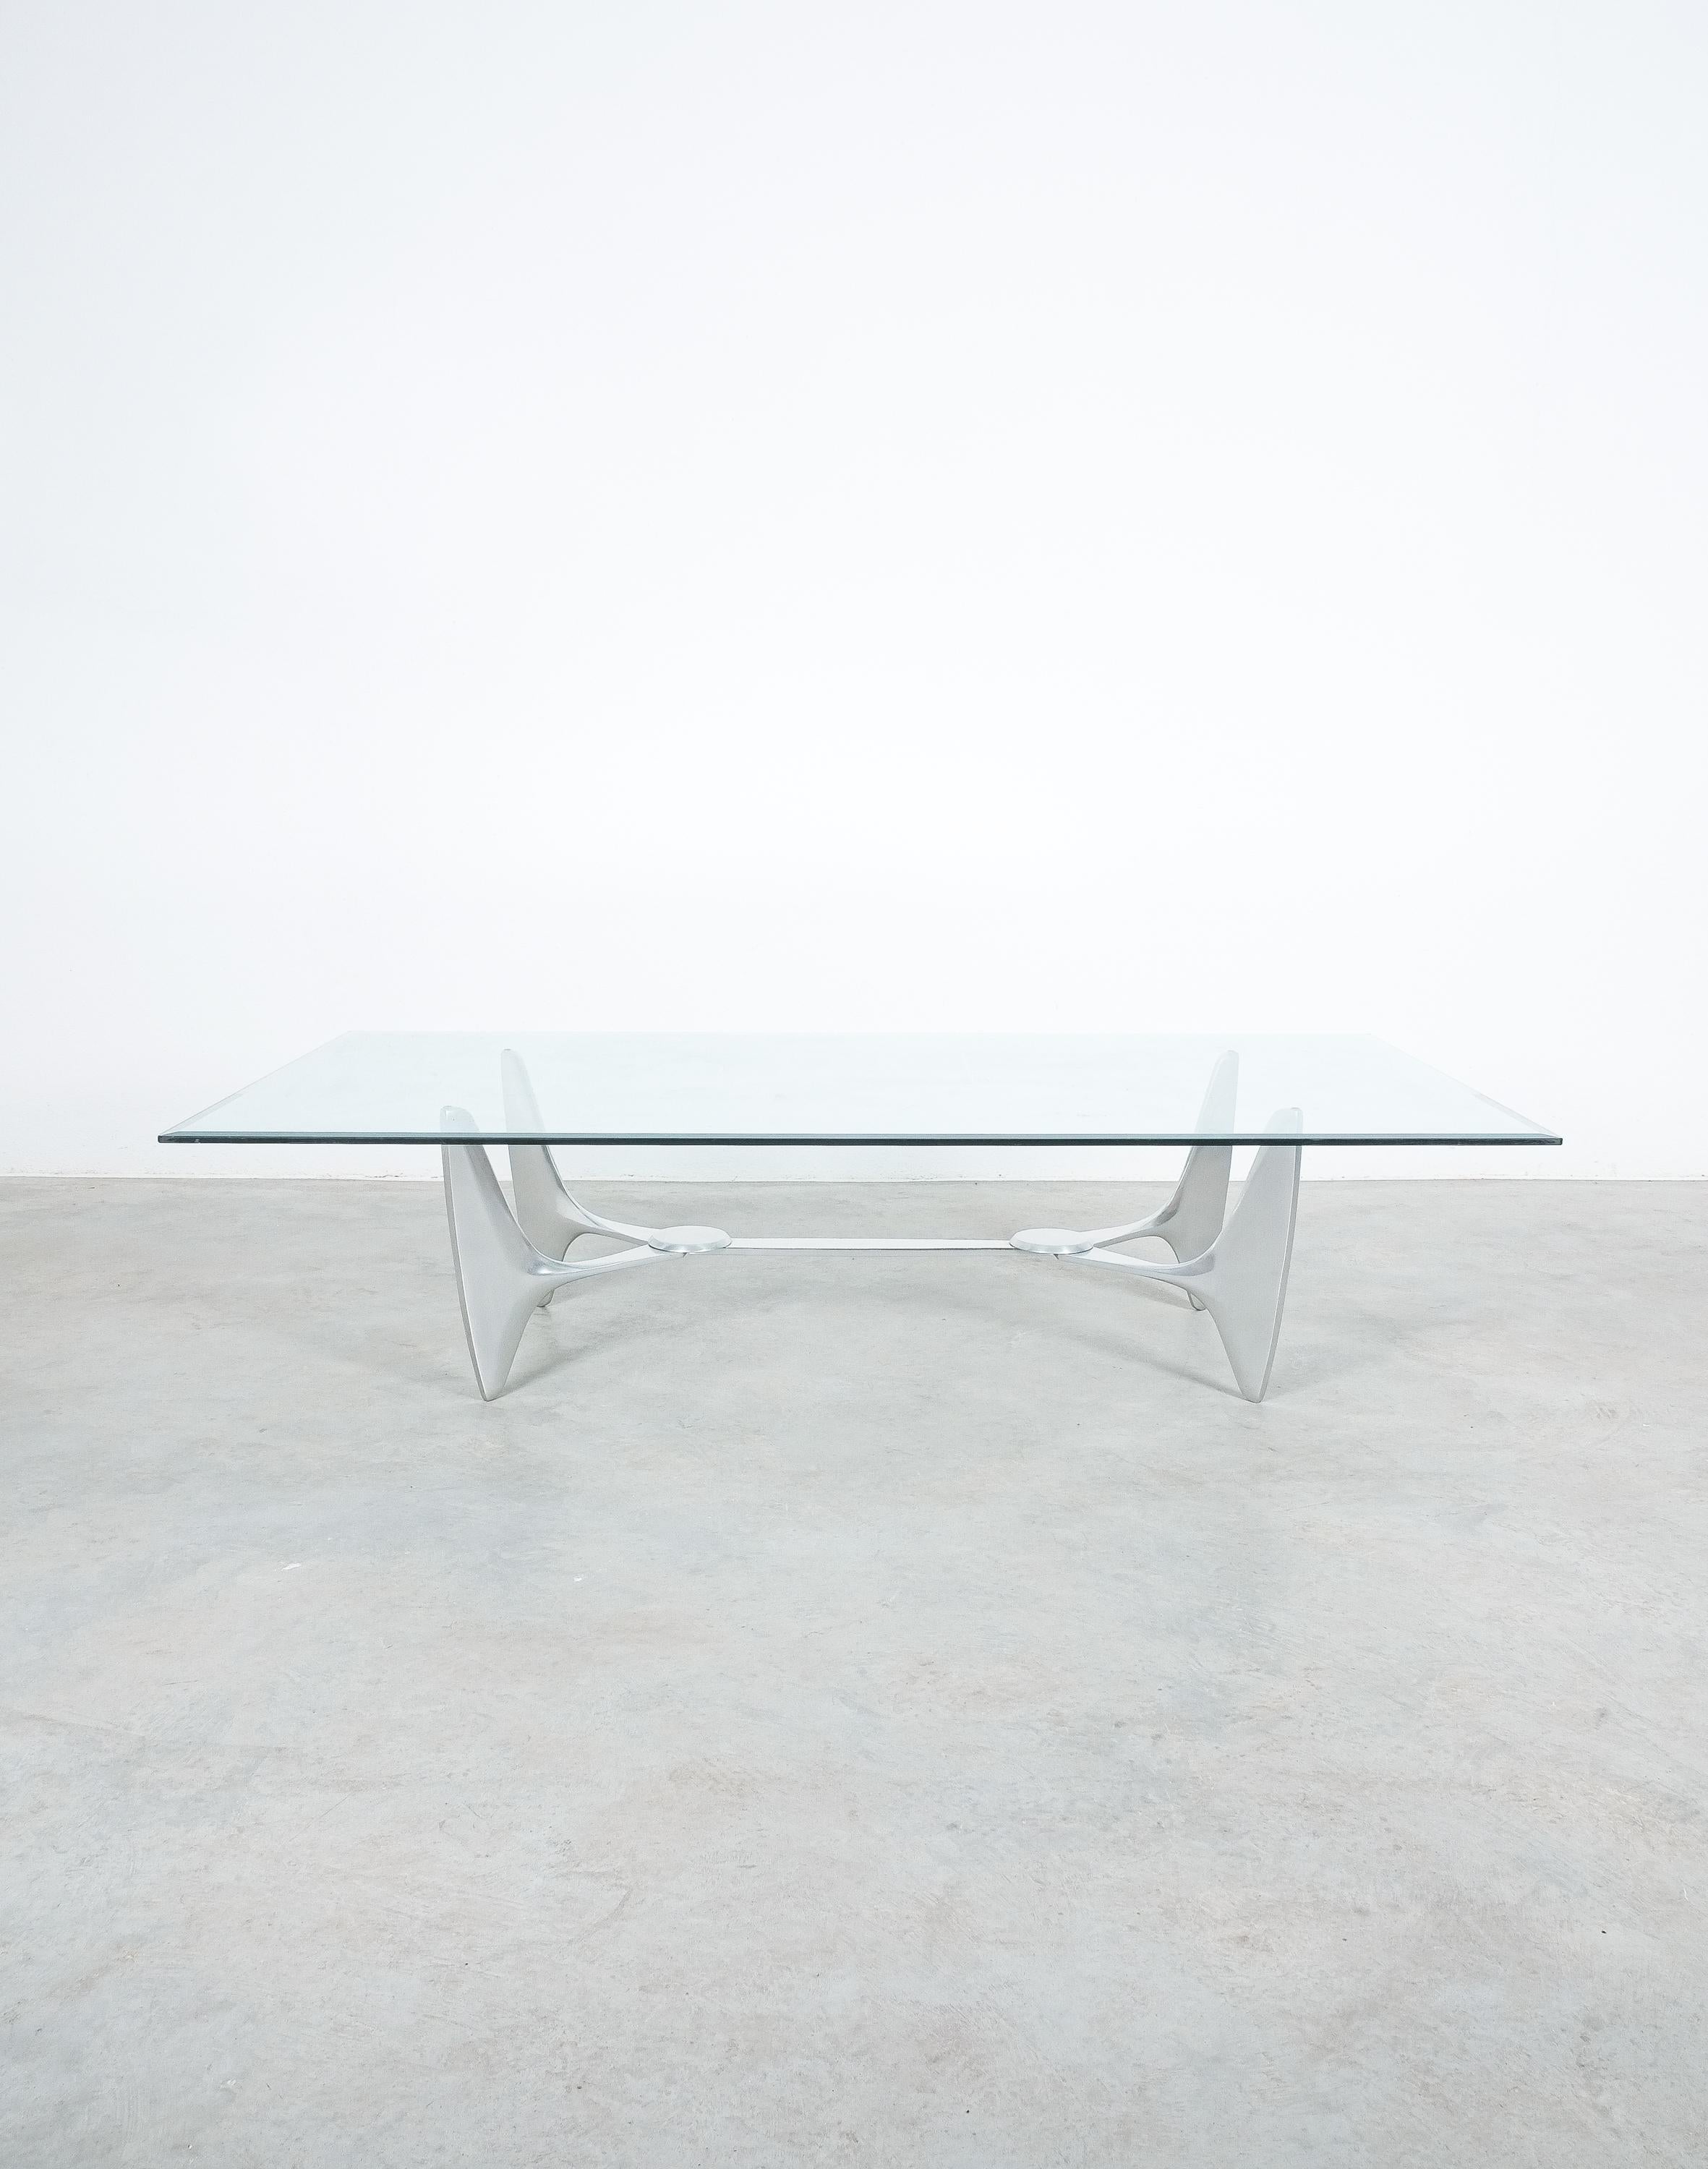 Space Age Sculptural Aluminum Coffee Table by Knut Hesterberg, Germany, Circa 1960